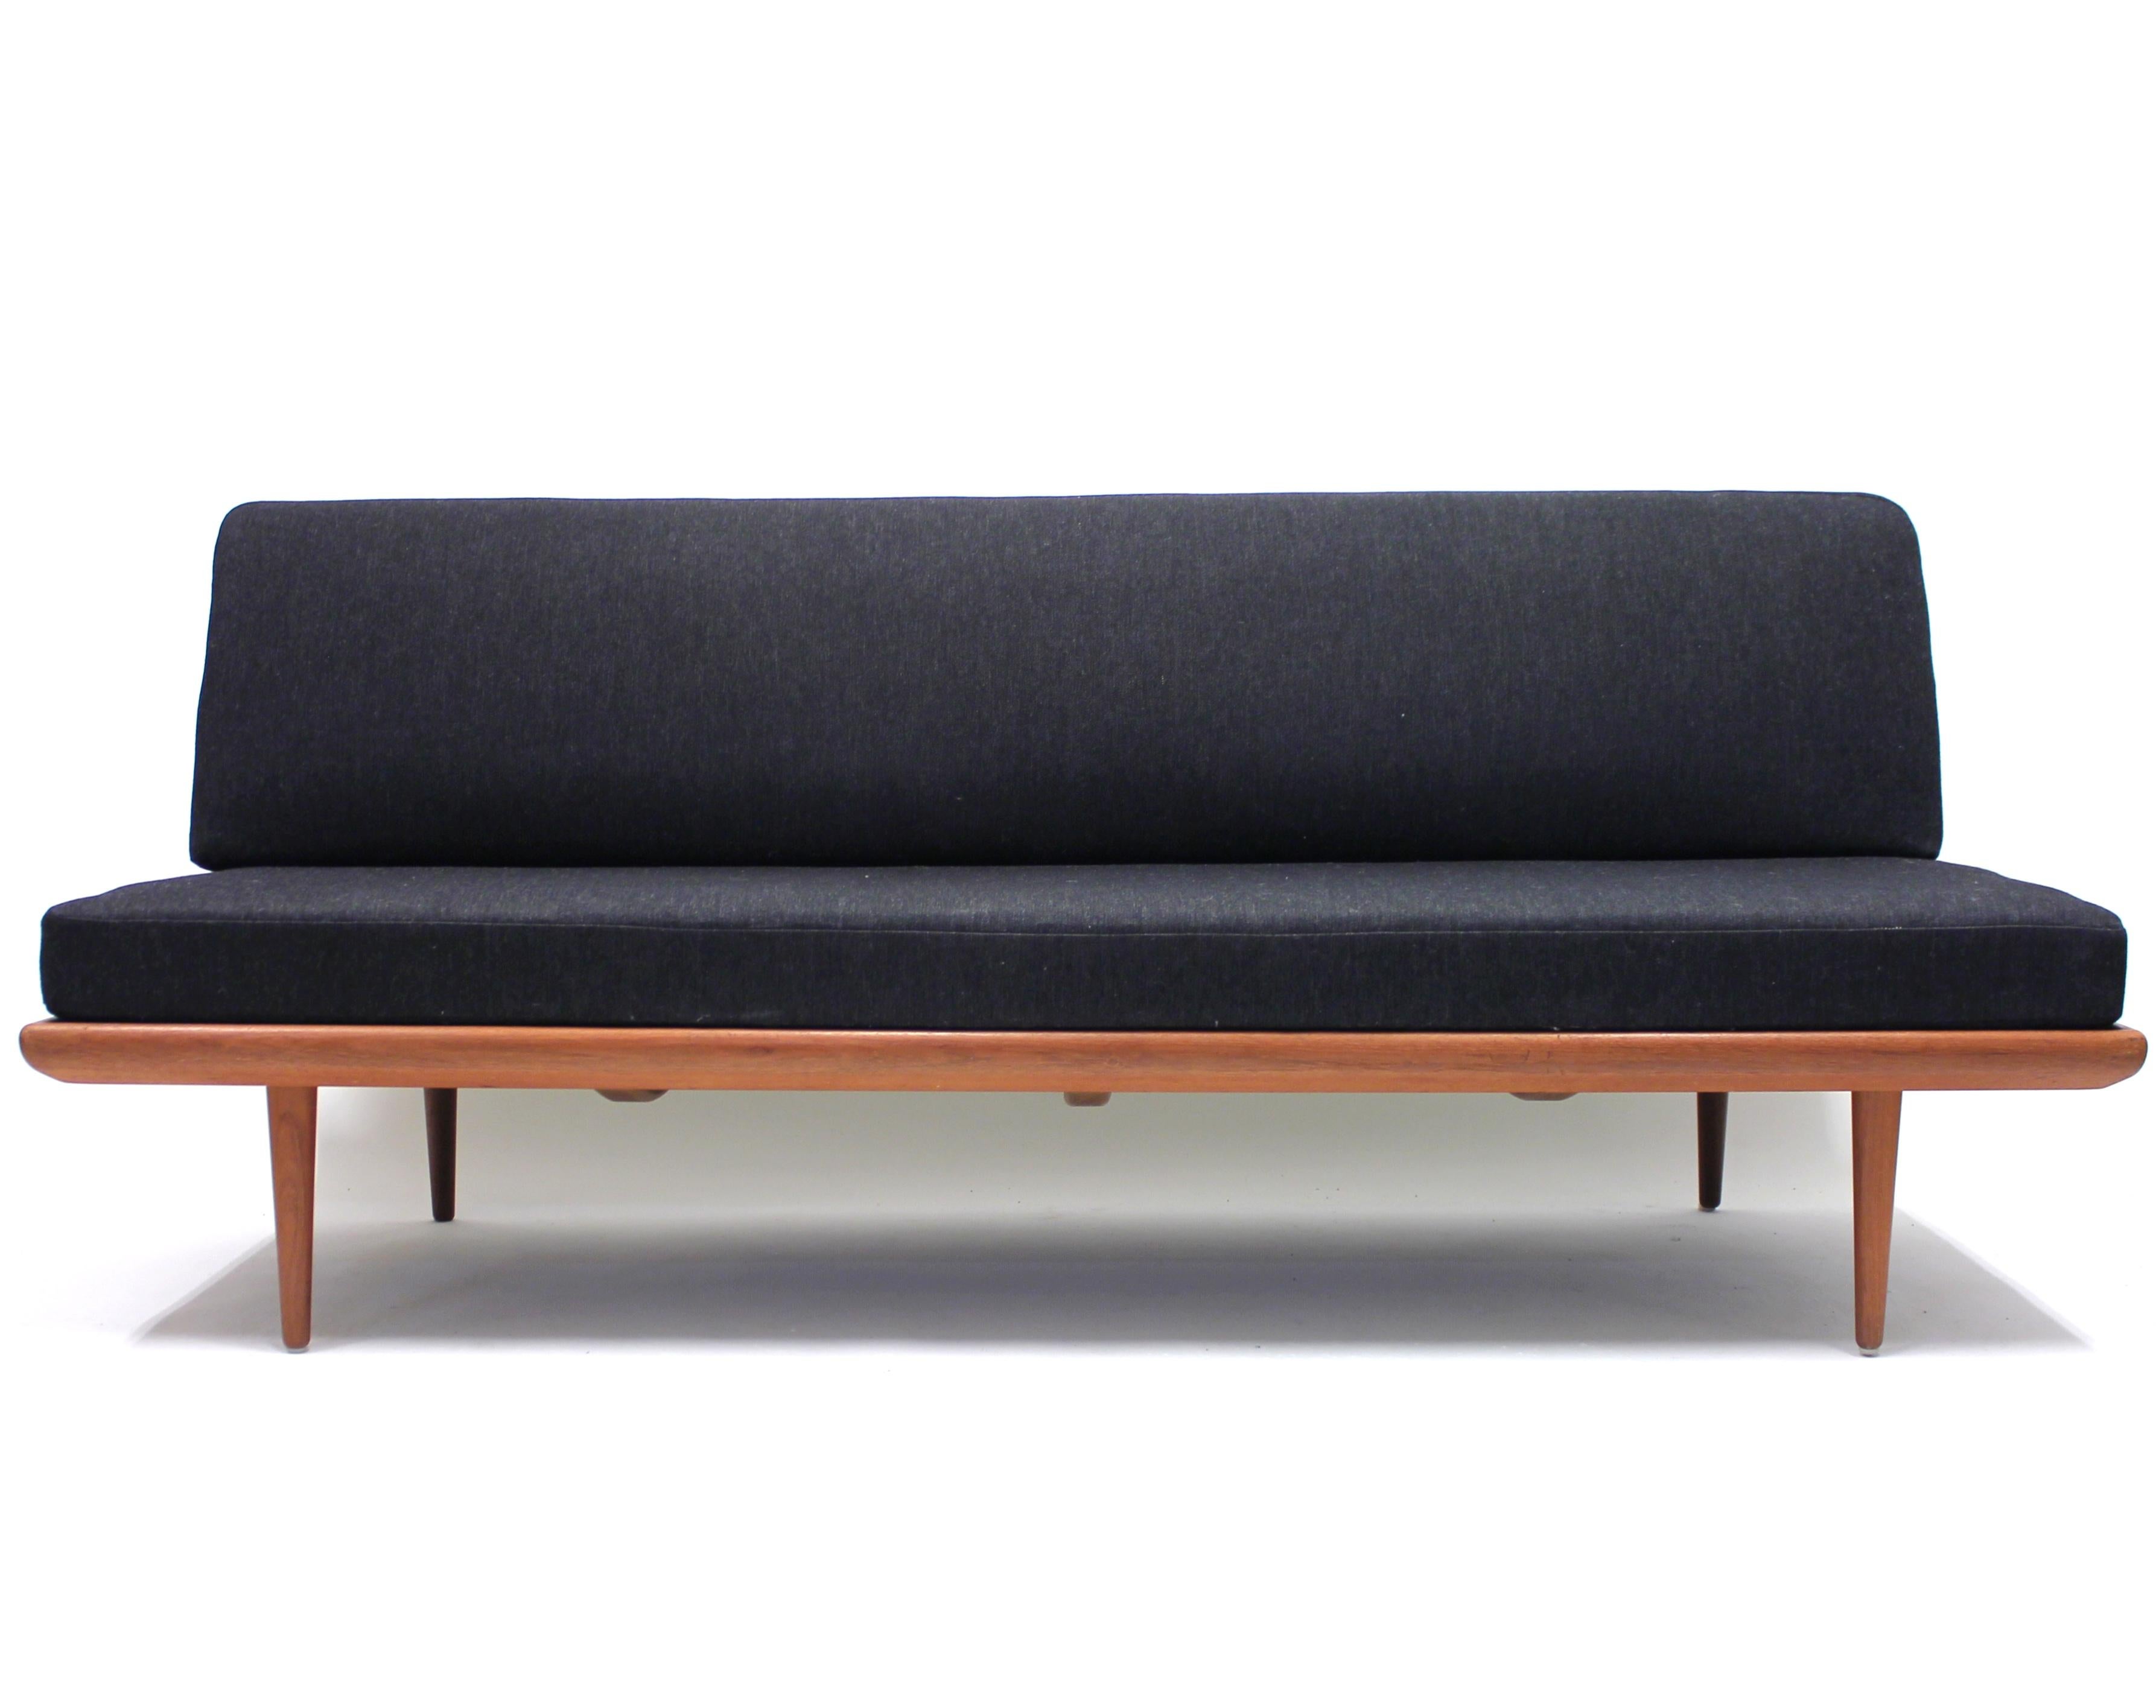 Sofa/daybed model Minerva designed by Danish duo Peter Hvidt & Orla Mølgaard-Nielsen in 1953. Original dark grey fabric on a teak frame. The Minerva series is a whole series of sofas in different sizes and with different armrest options (also